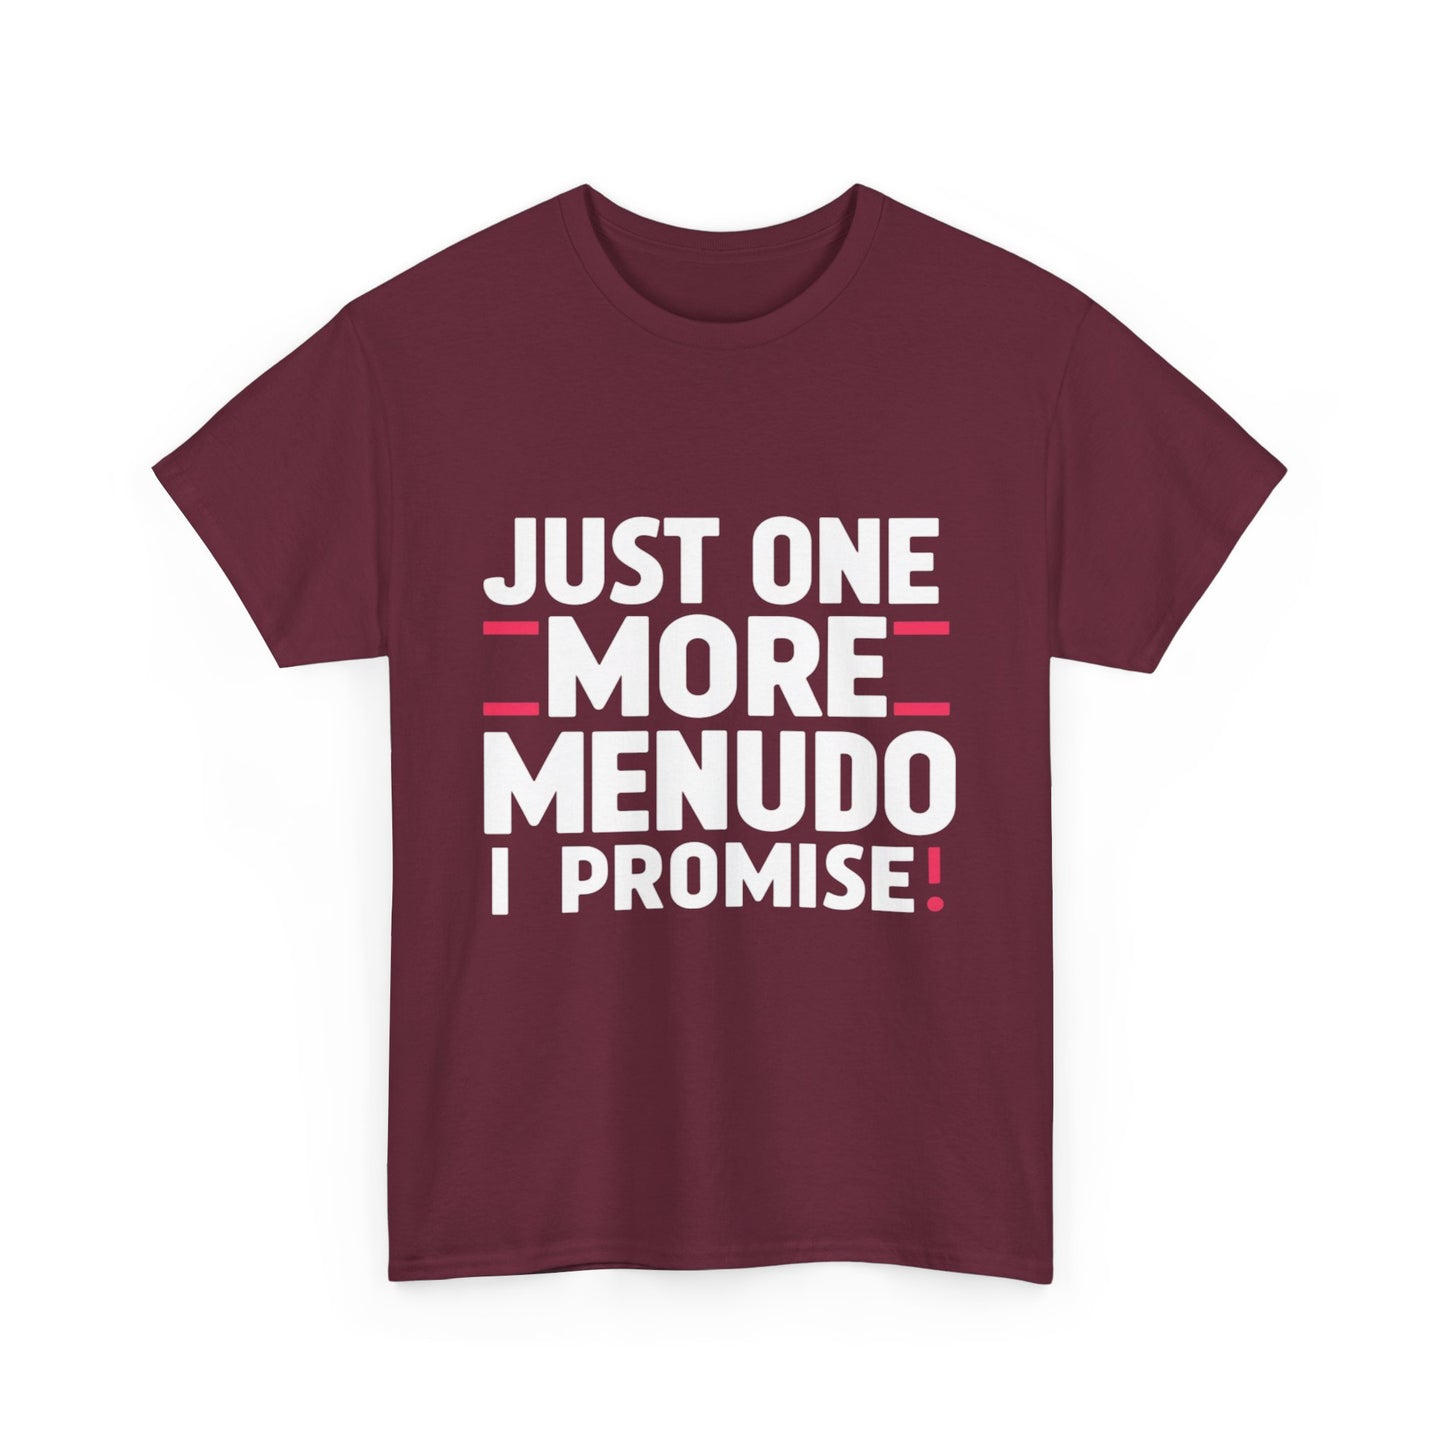 Just One More Menudo I Promise Mexican Food Graphic Unisex Heavy Cotton Tee Cotton Funny Humorous Graphic Soft Premium Unisex Men Women Maroon T-shirt Birthday Gift-27